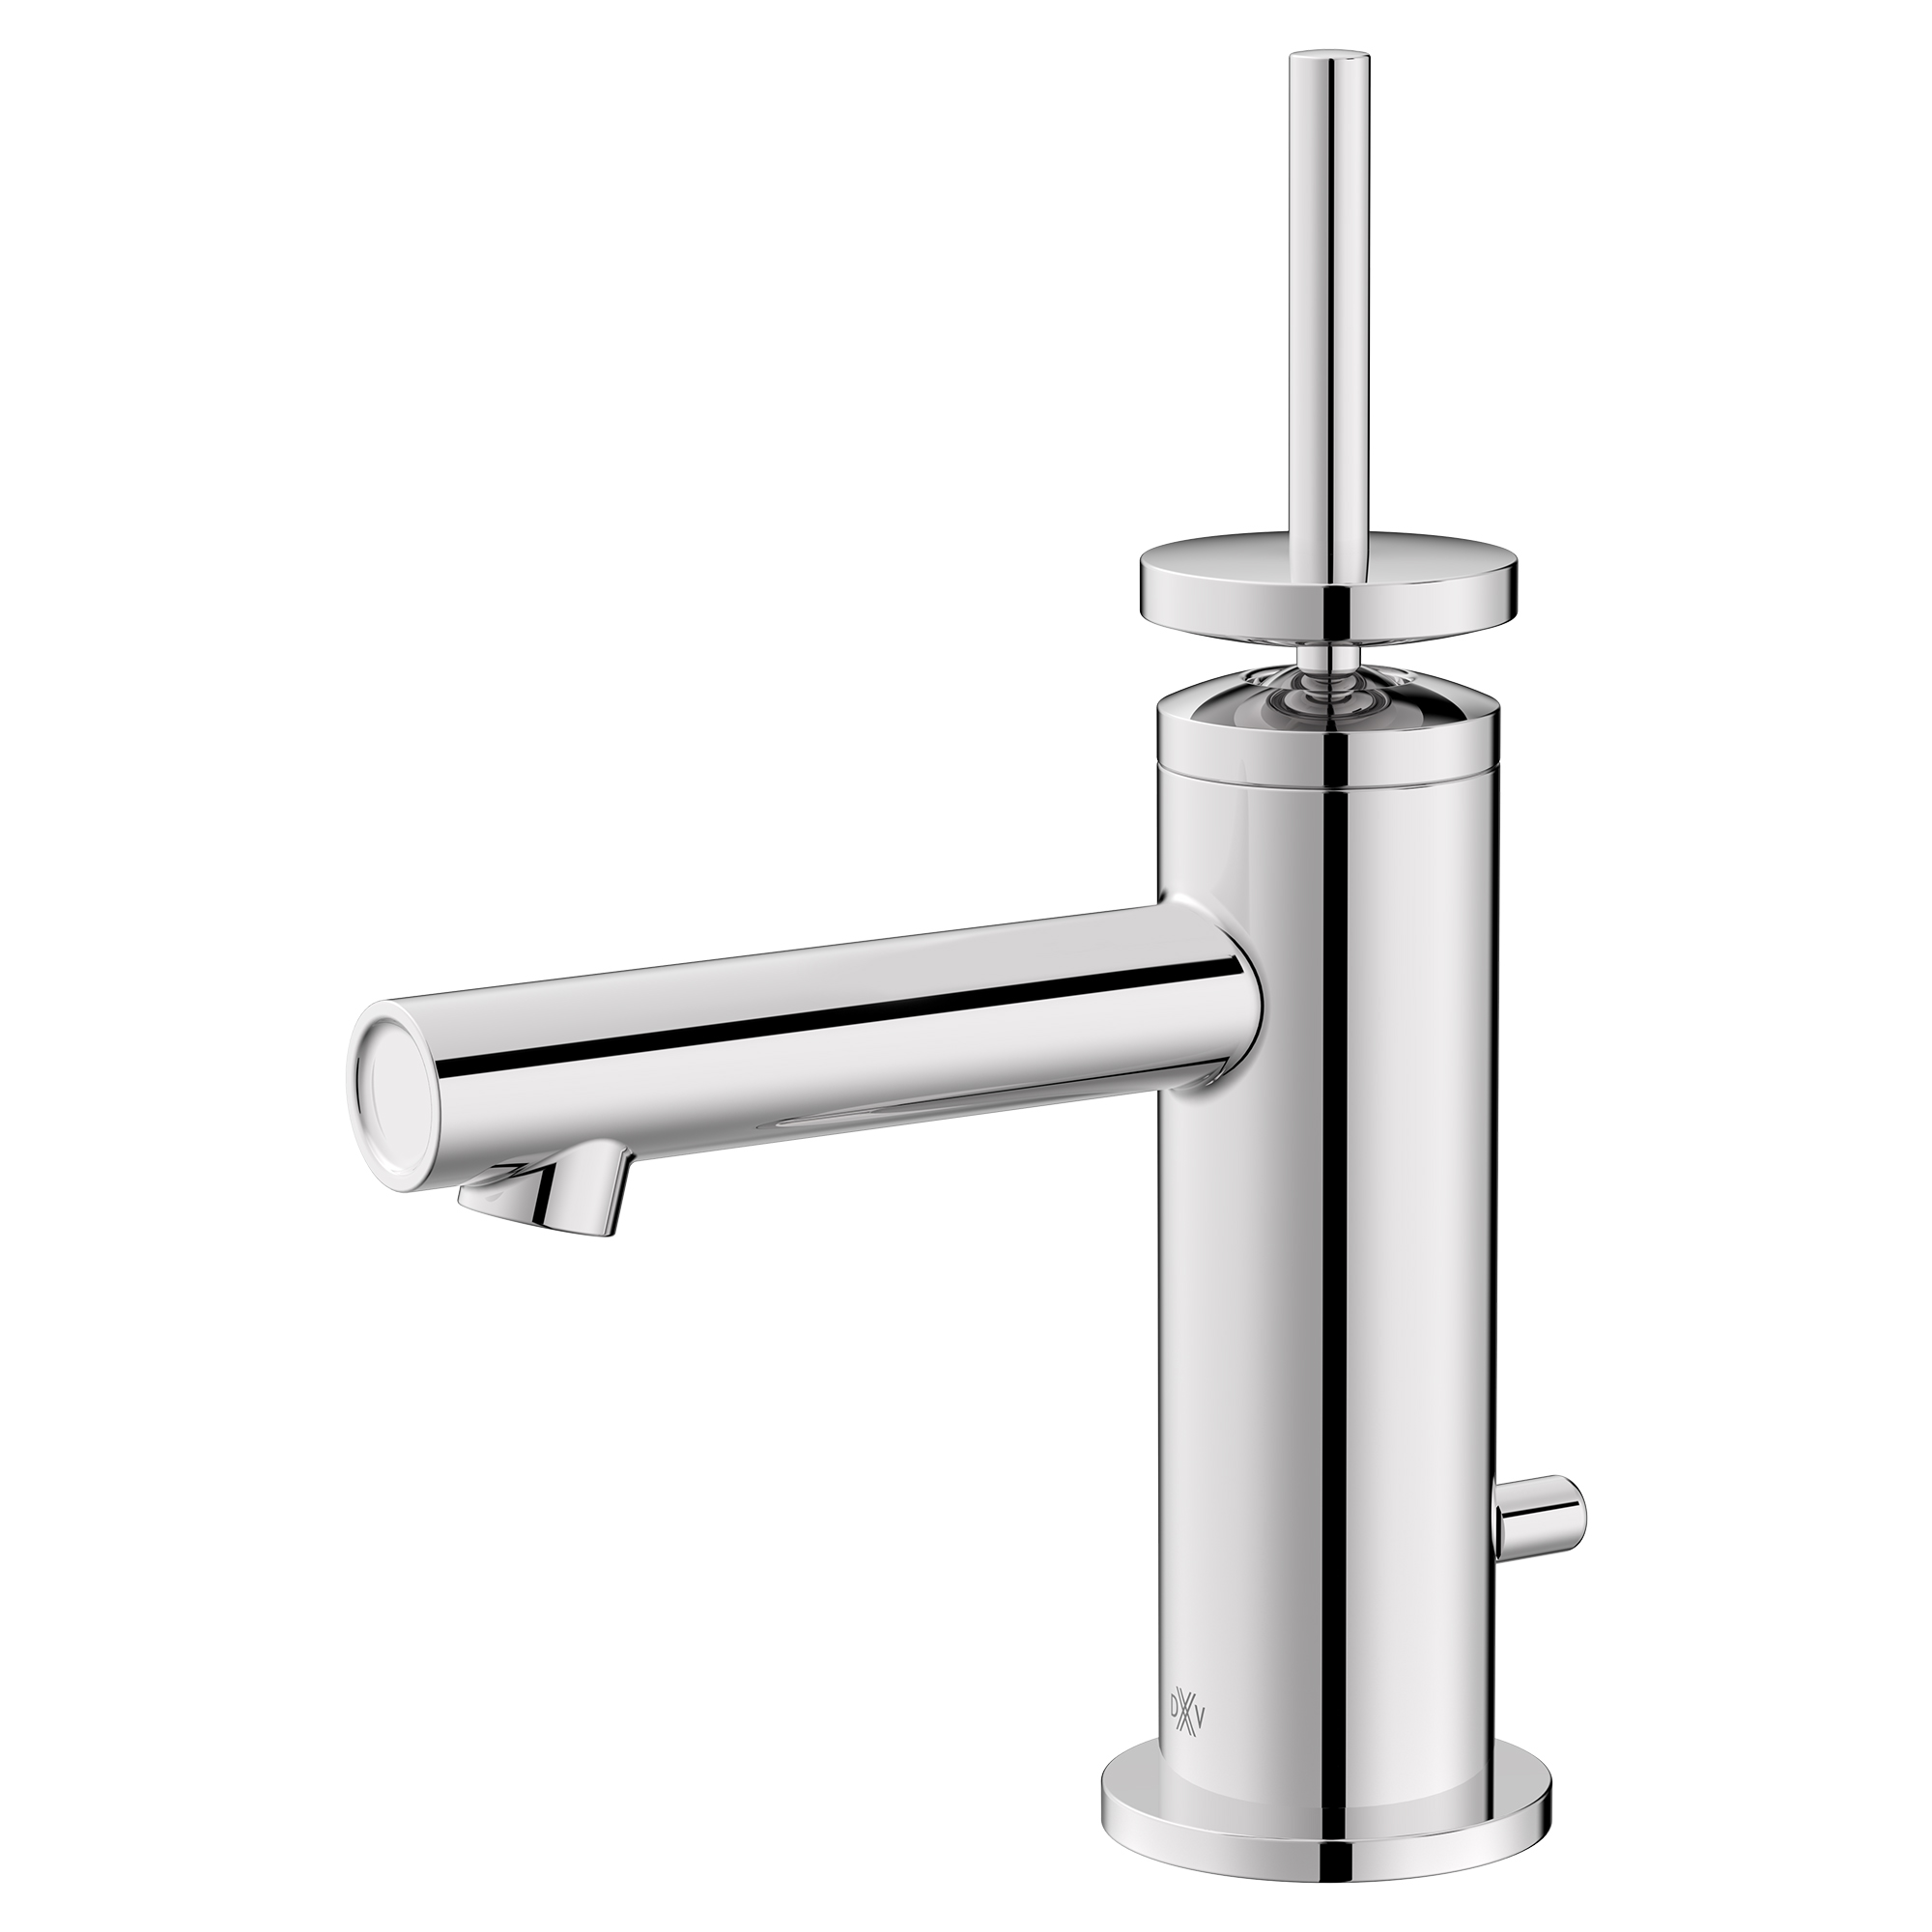 Percy Single Handle Bathroom Faucet with Indicator Markings and Stem Handle